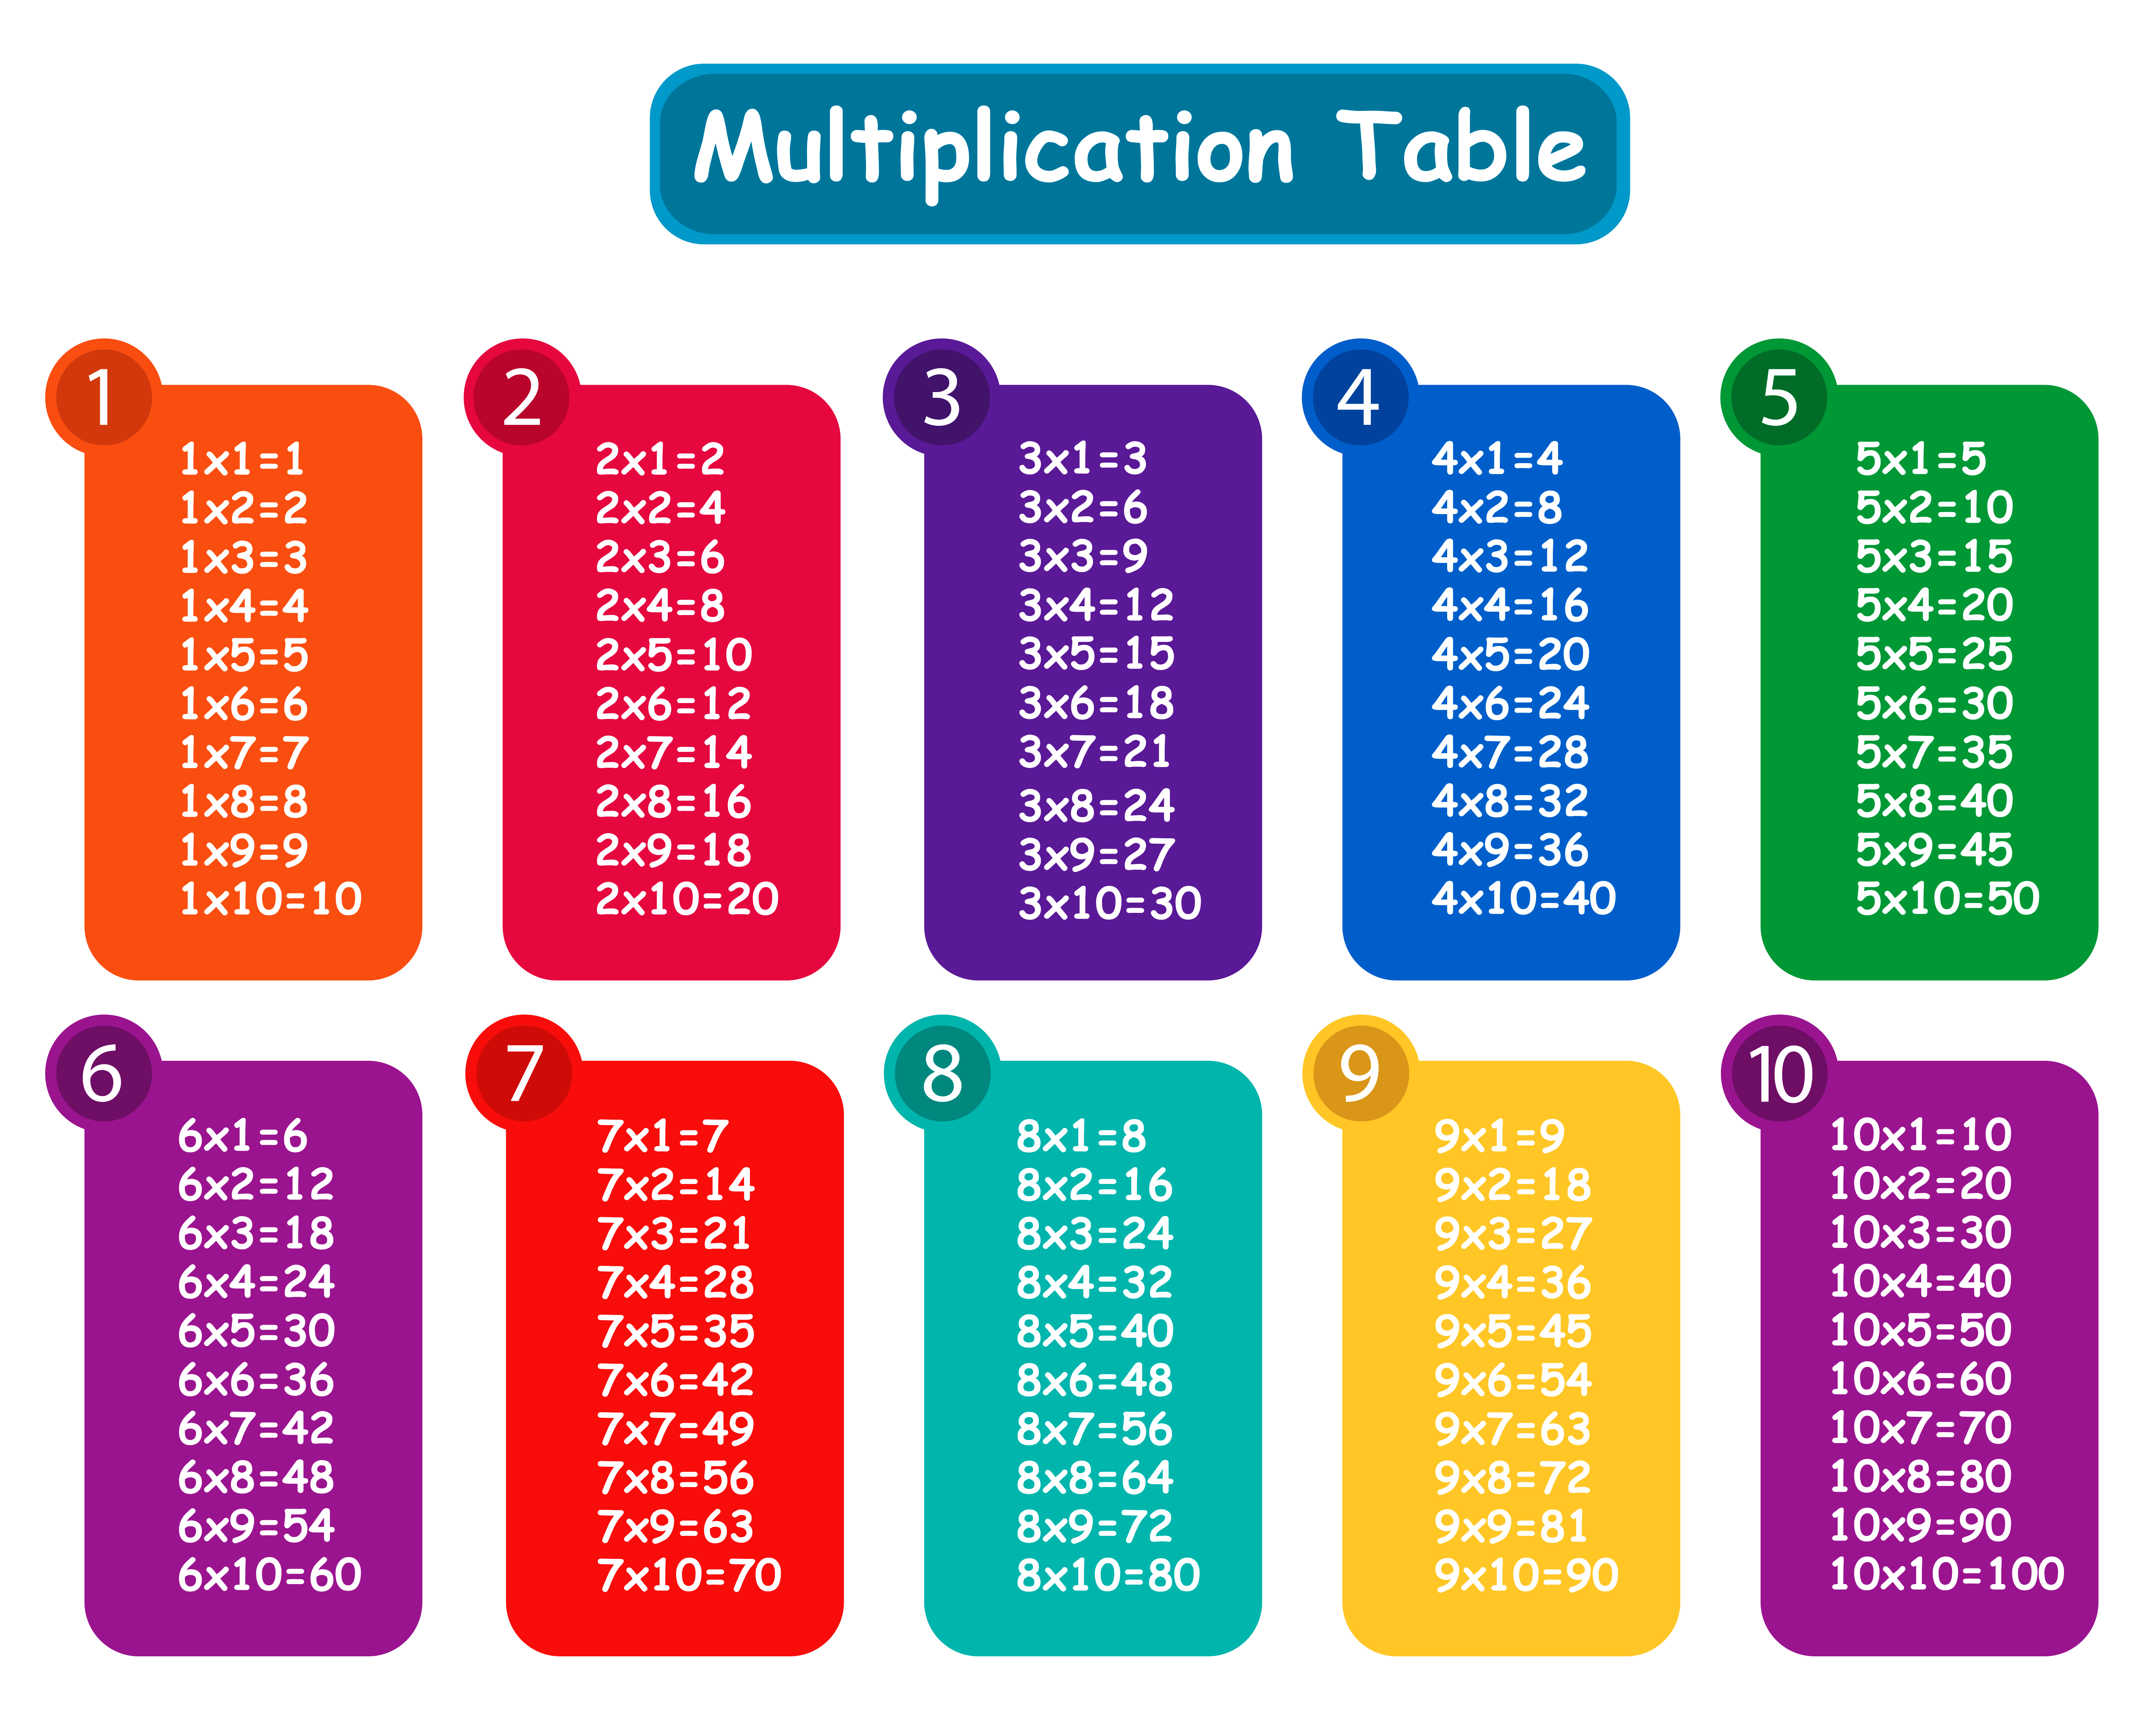 Colorful table png gallery. Multiplication clipart grade 6